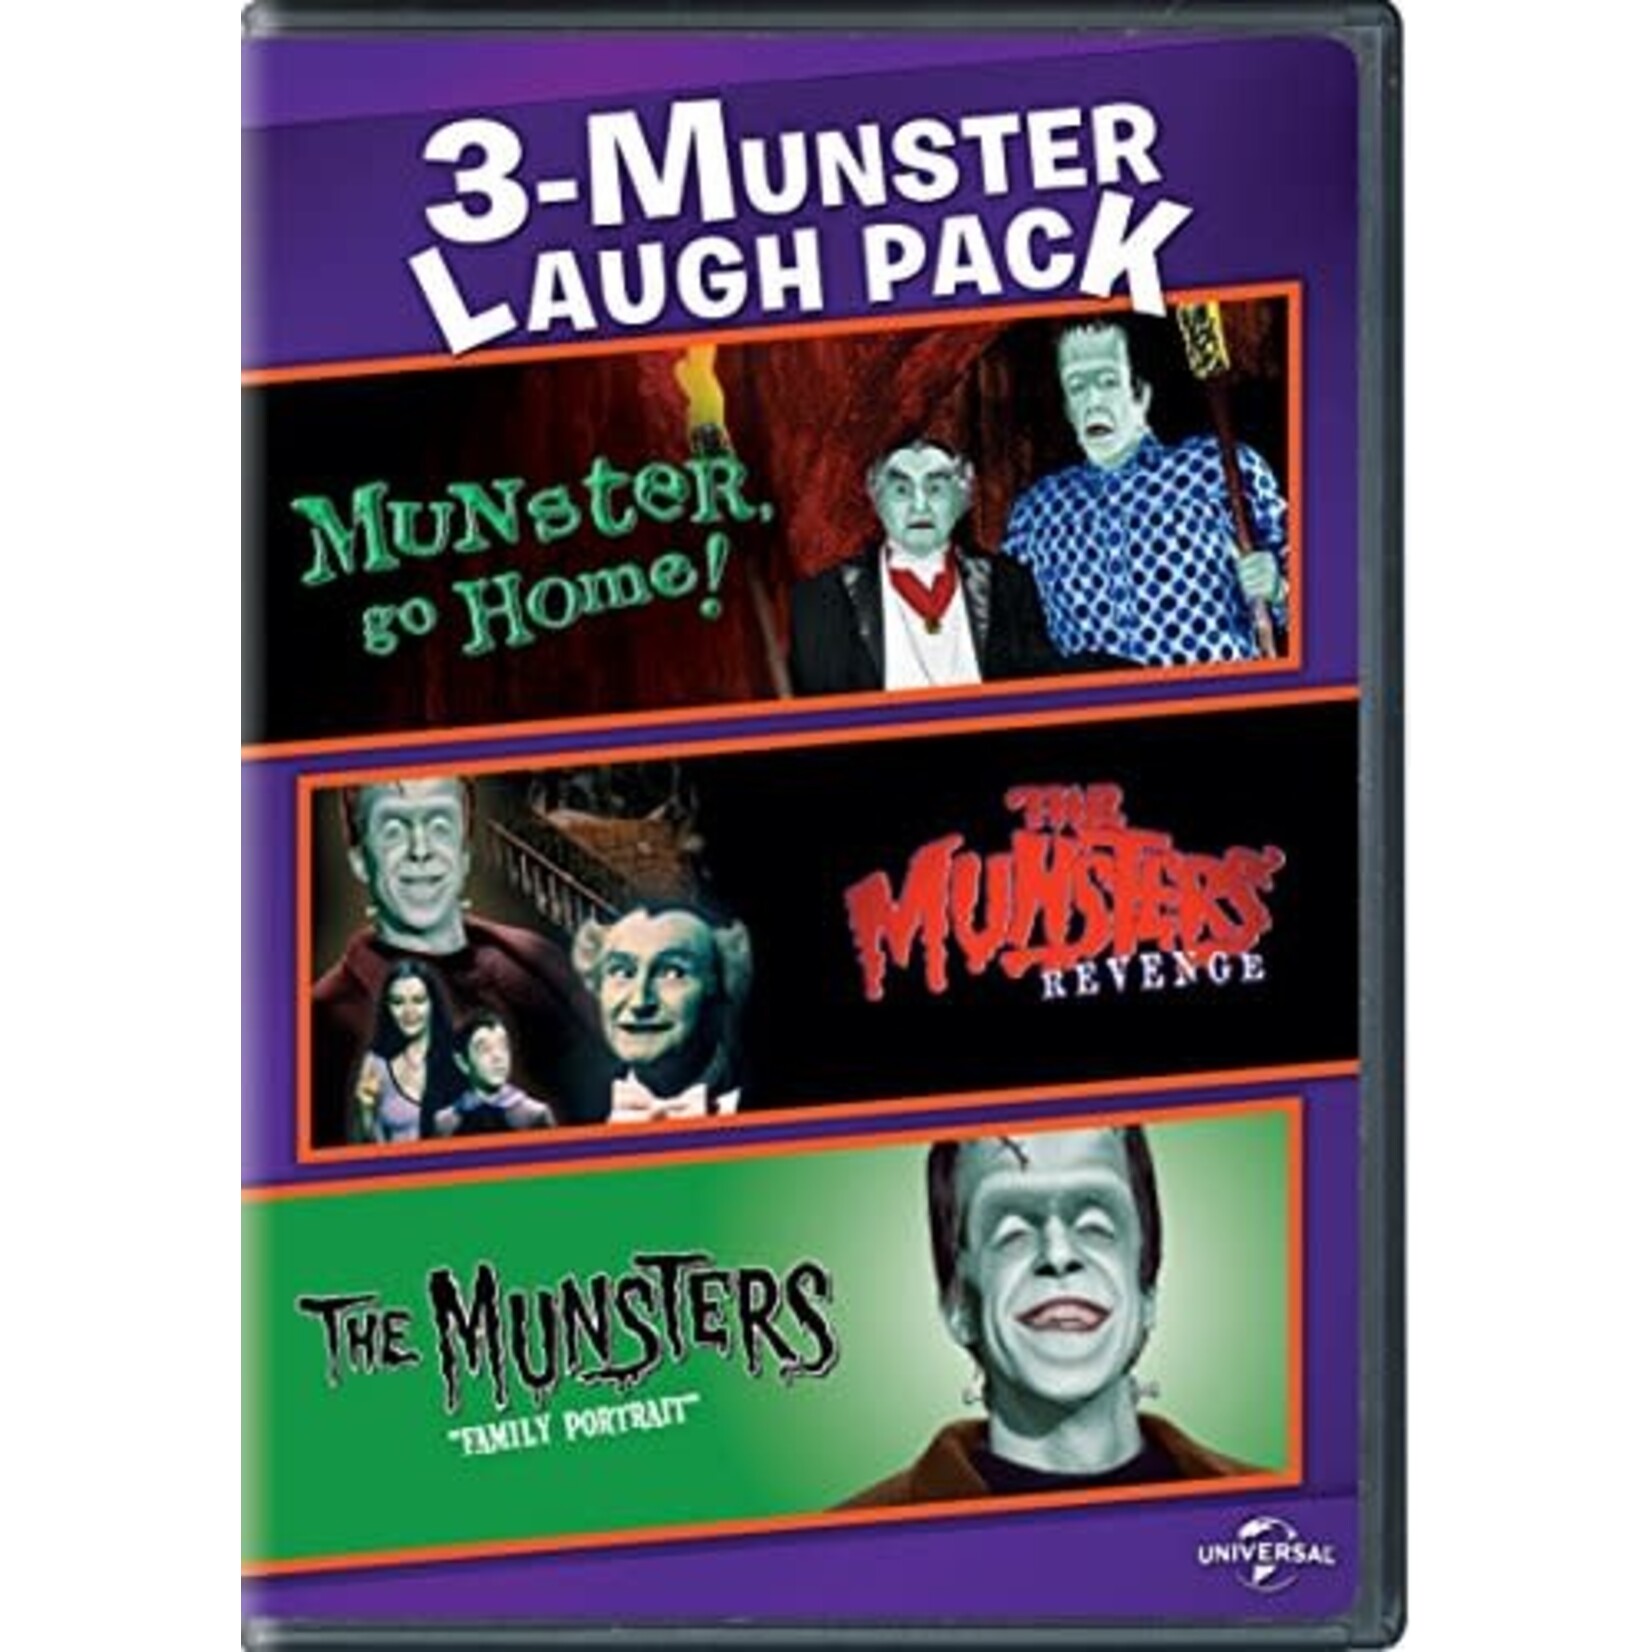 Munsters - 3-Munster Laugh Pack [USED 2DVD]